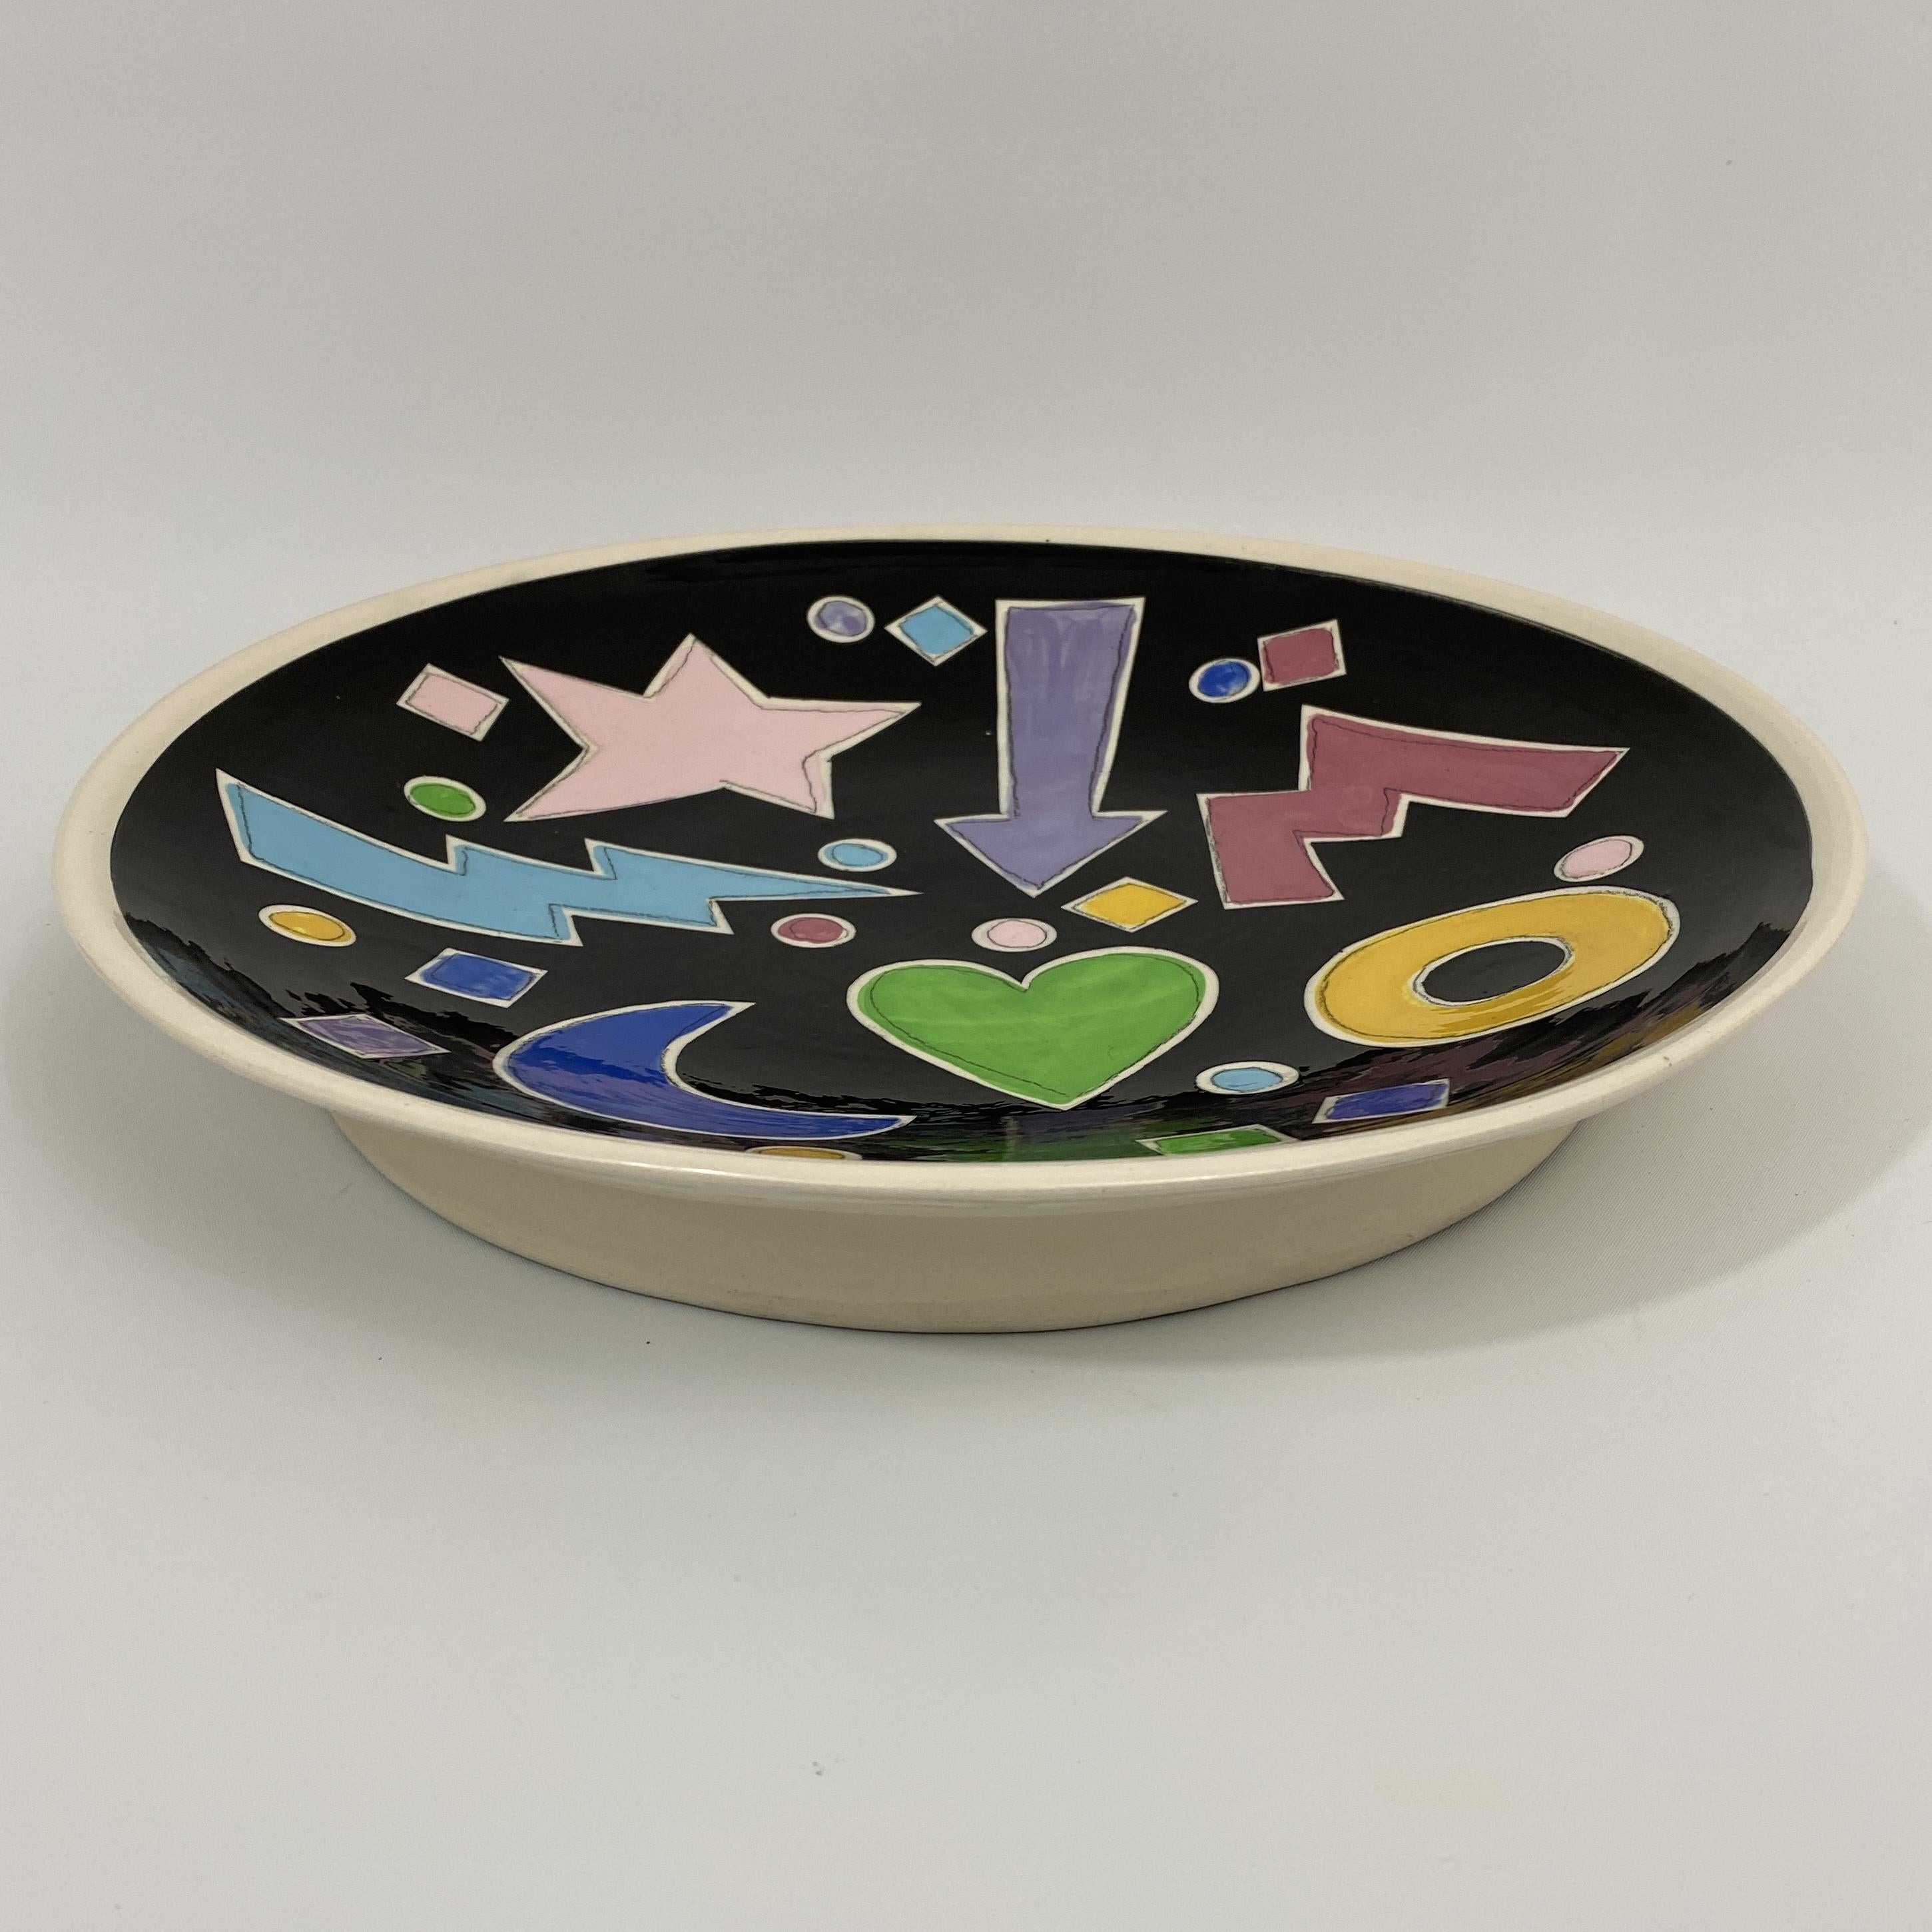 Hand-Painted 1988 Ted Saito Signed Artist Studio Pottery Pop Art Dish For Sale